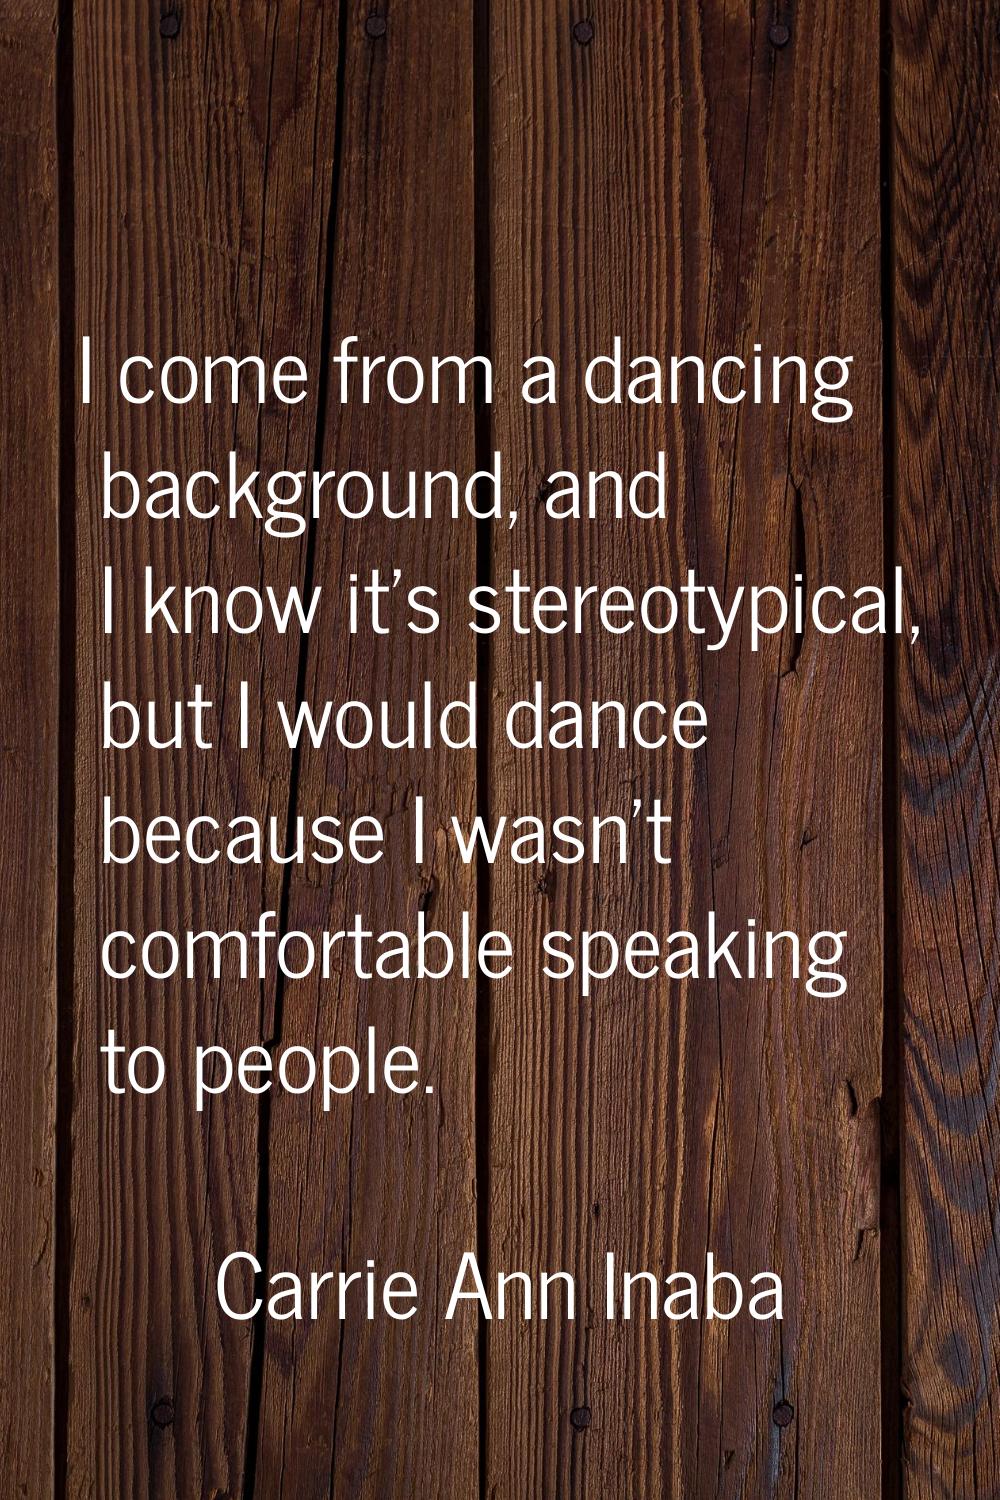 I come from a dancing background, and I know it's stereotypical, but I would dance because I wasn't